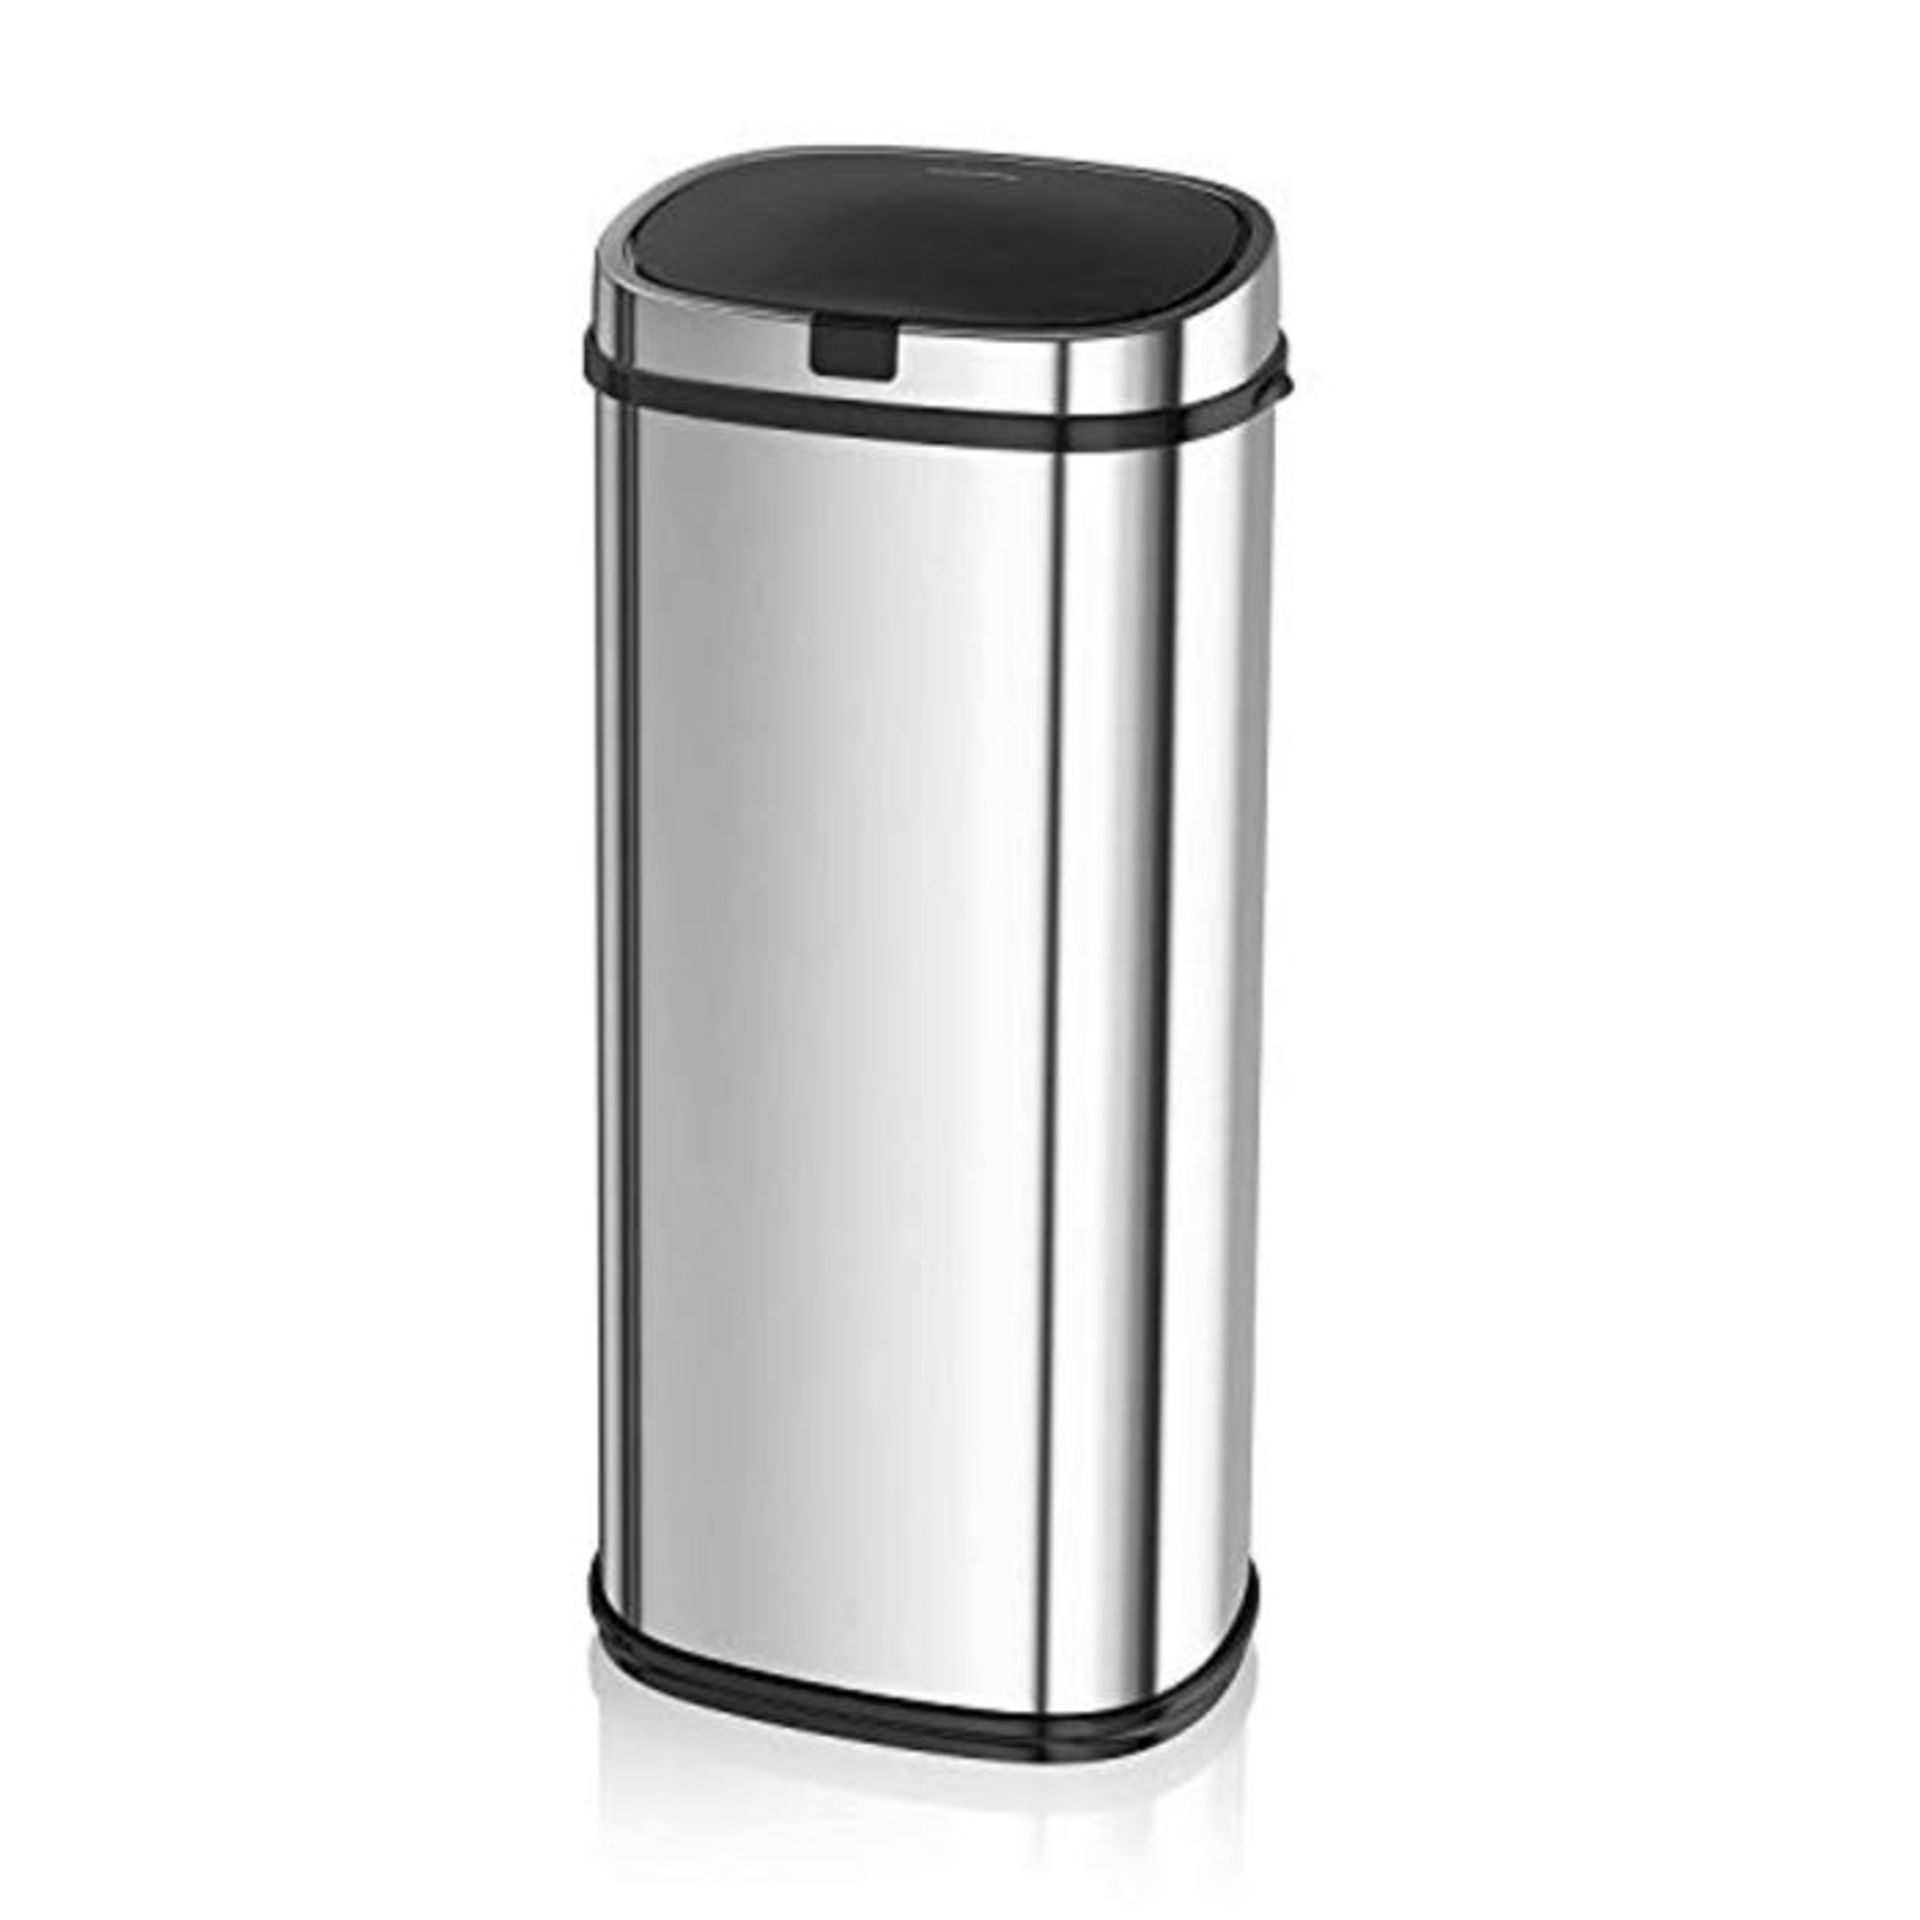 RRP £85.00 Morphy Richards Chroma 971519 Square Sensor Bin with Motion Sensing Technology and 3 L